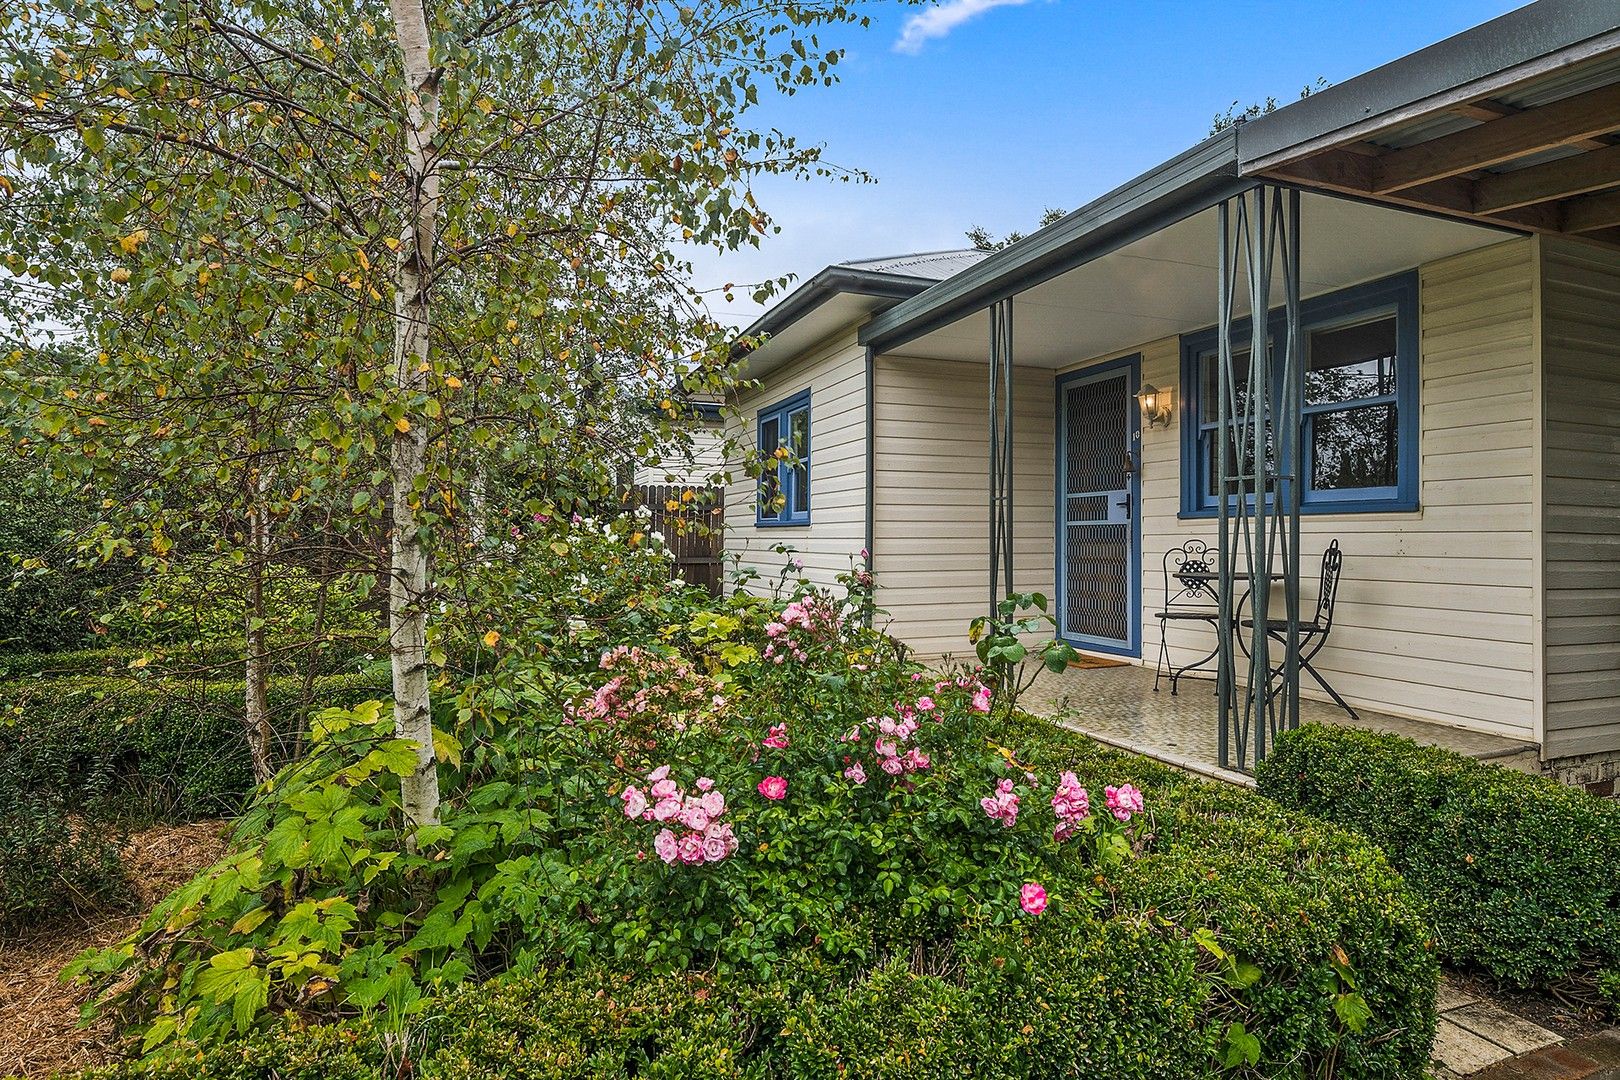 41b Robertson Road, Moss Vale, NSW 2577 - Property Details